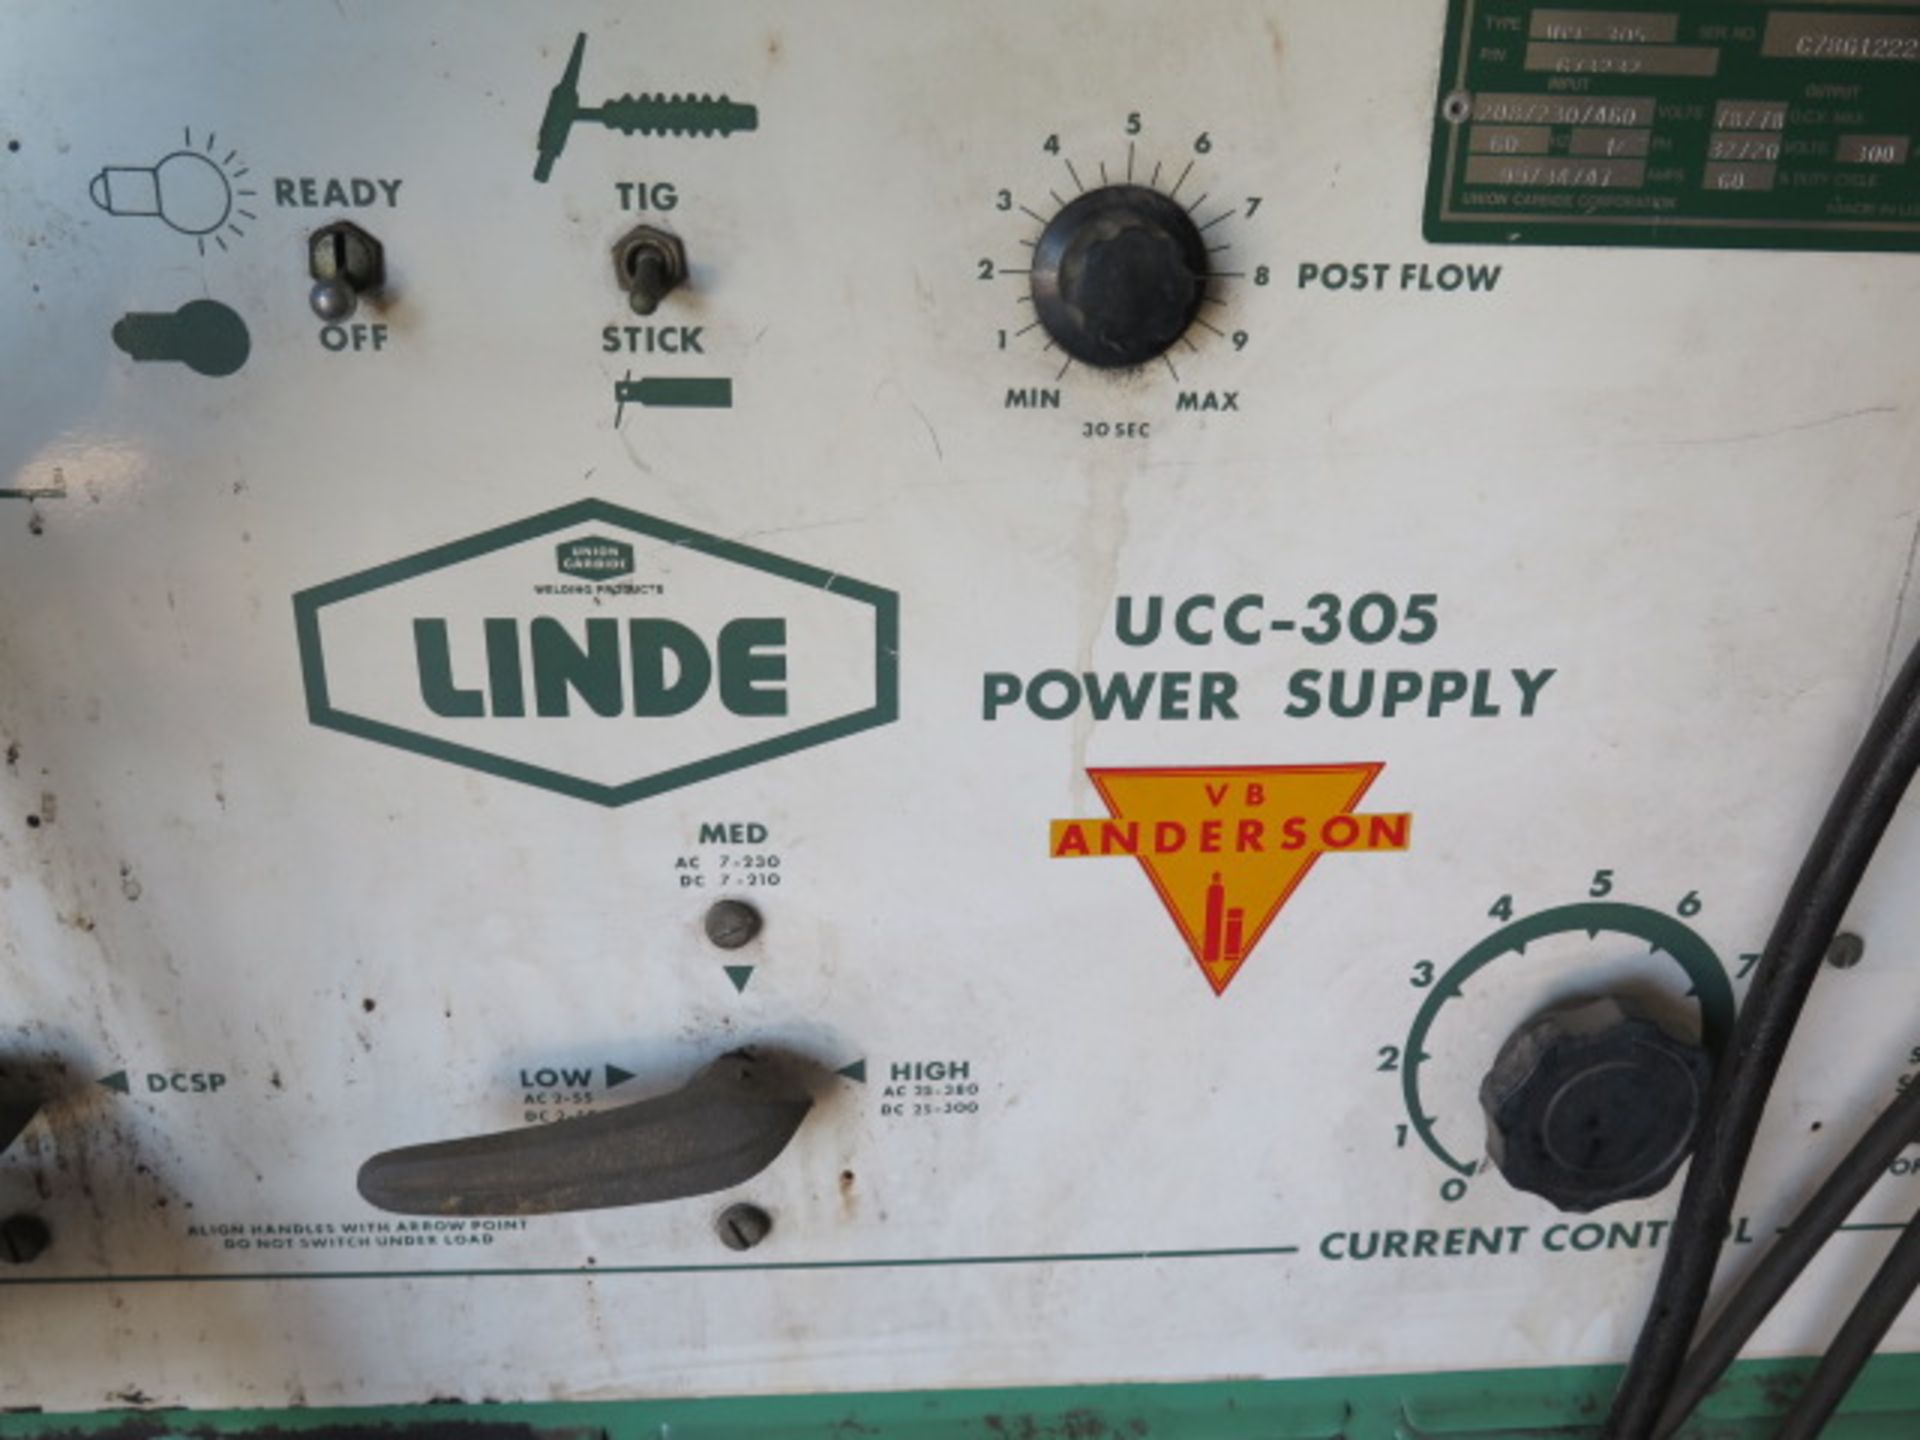 Linde UCC-305 Arc Welding Power Source s/n C78G12227 - Image 3 of 4